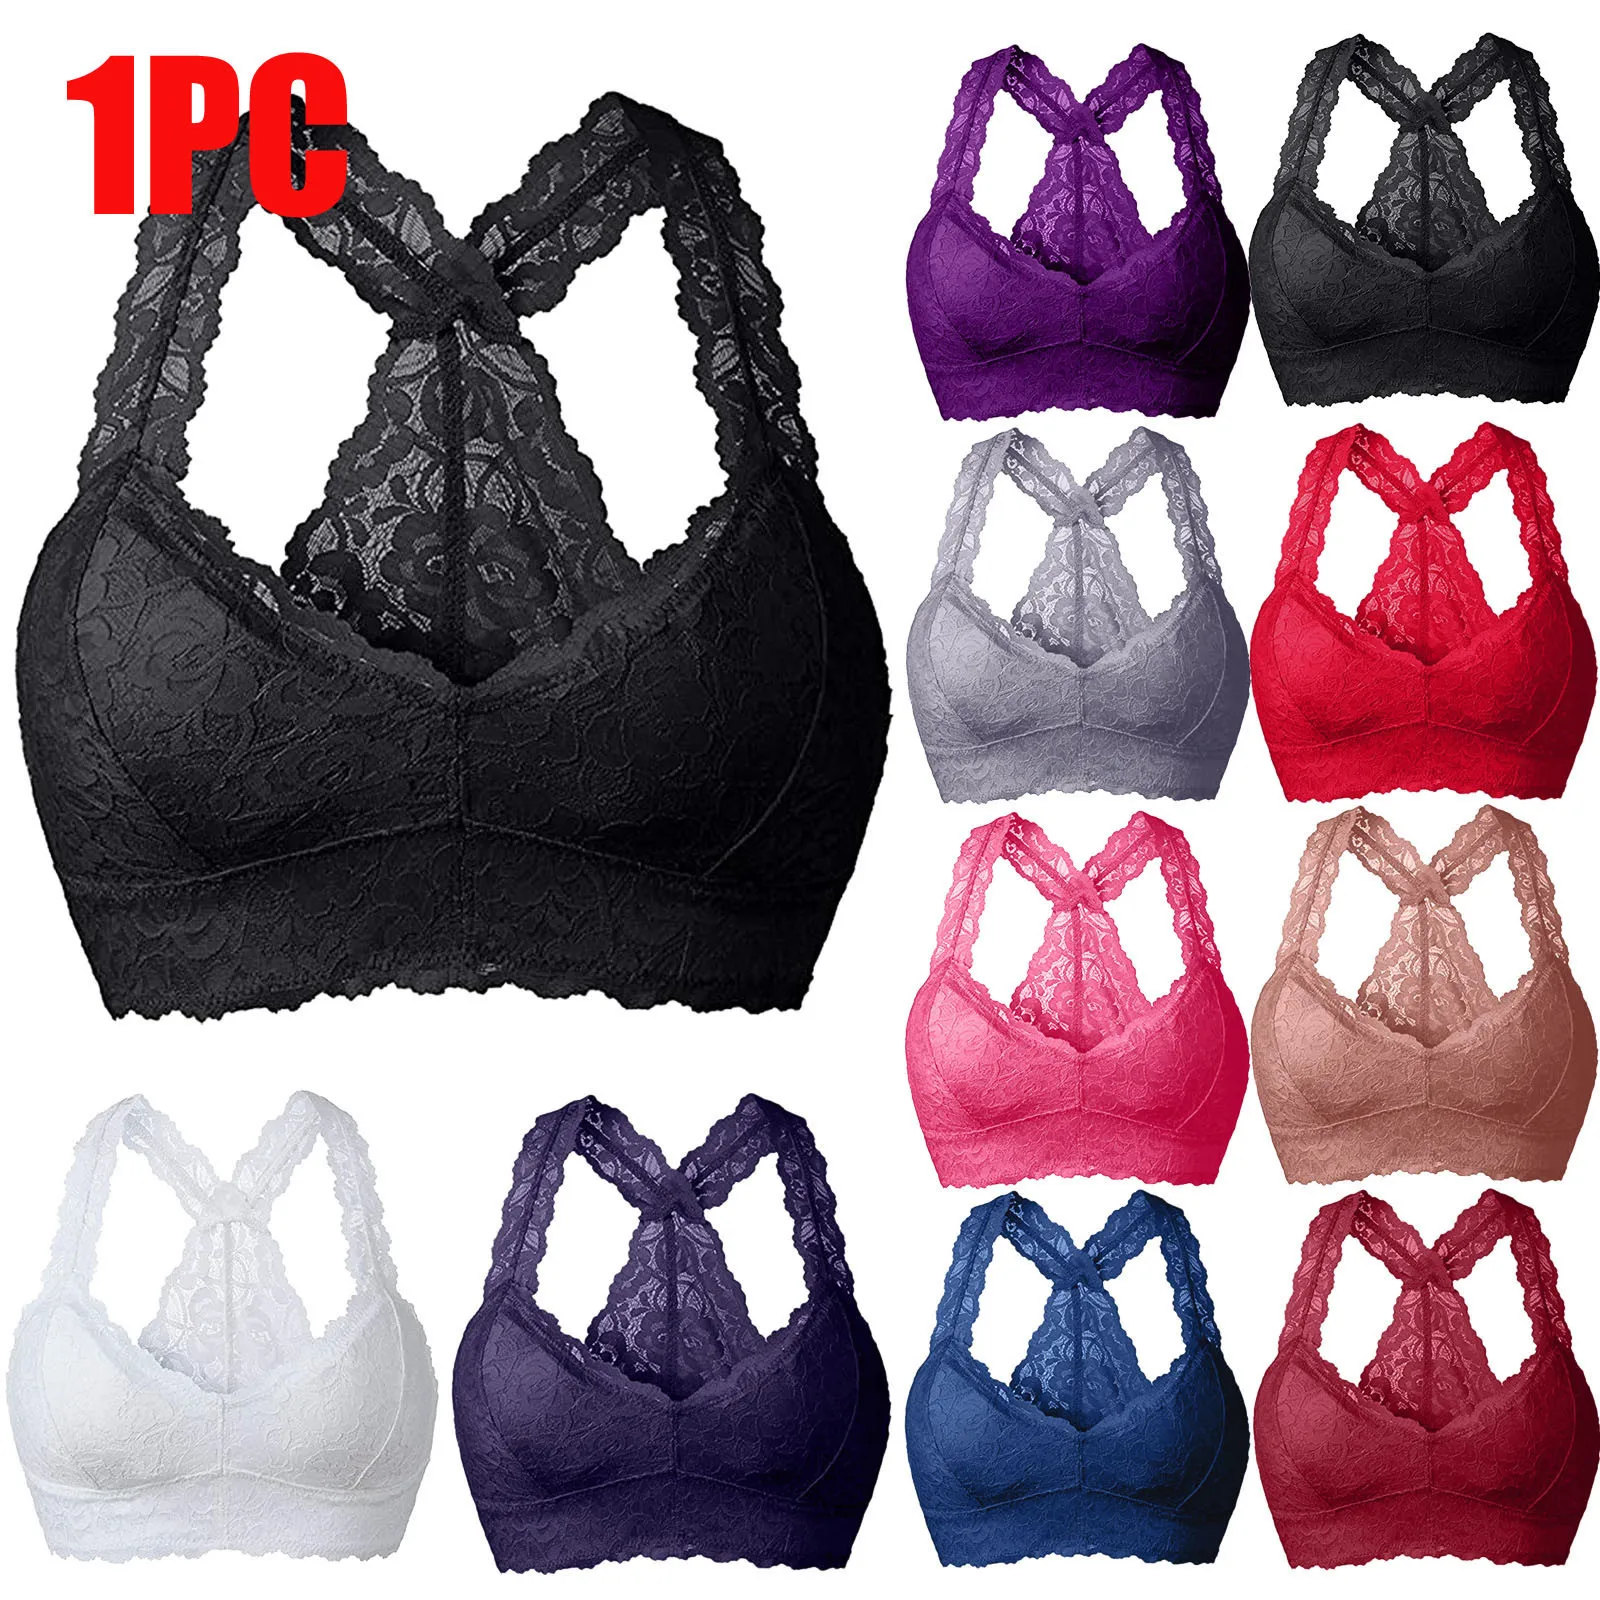 Camisole Top Lace Bra Back  Lace Tops Women Sexy Crop